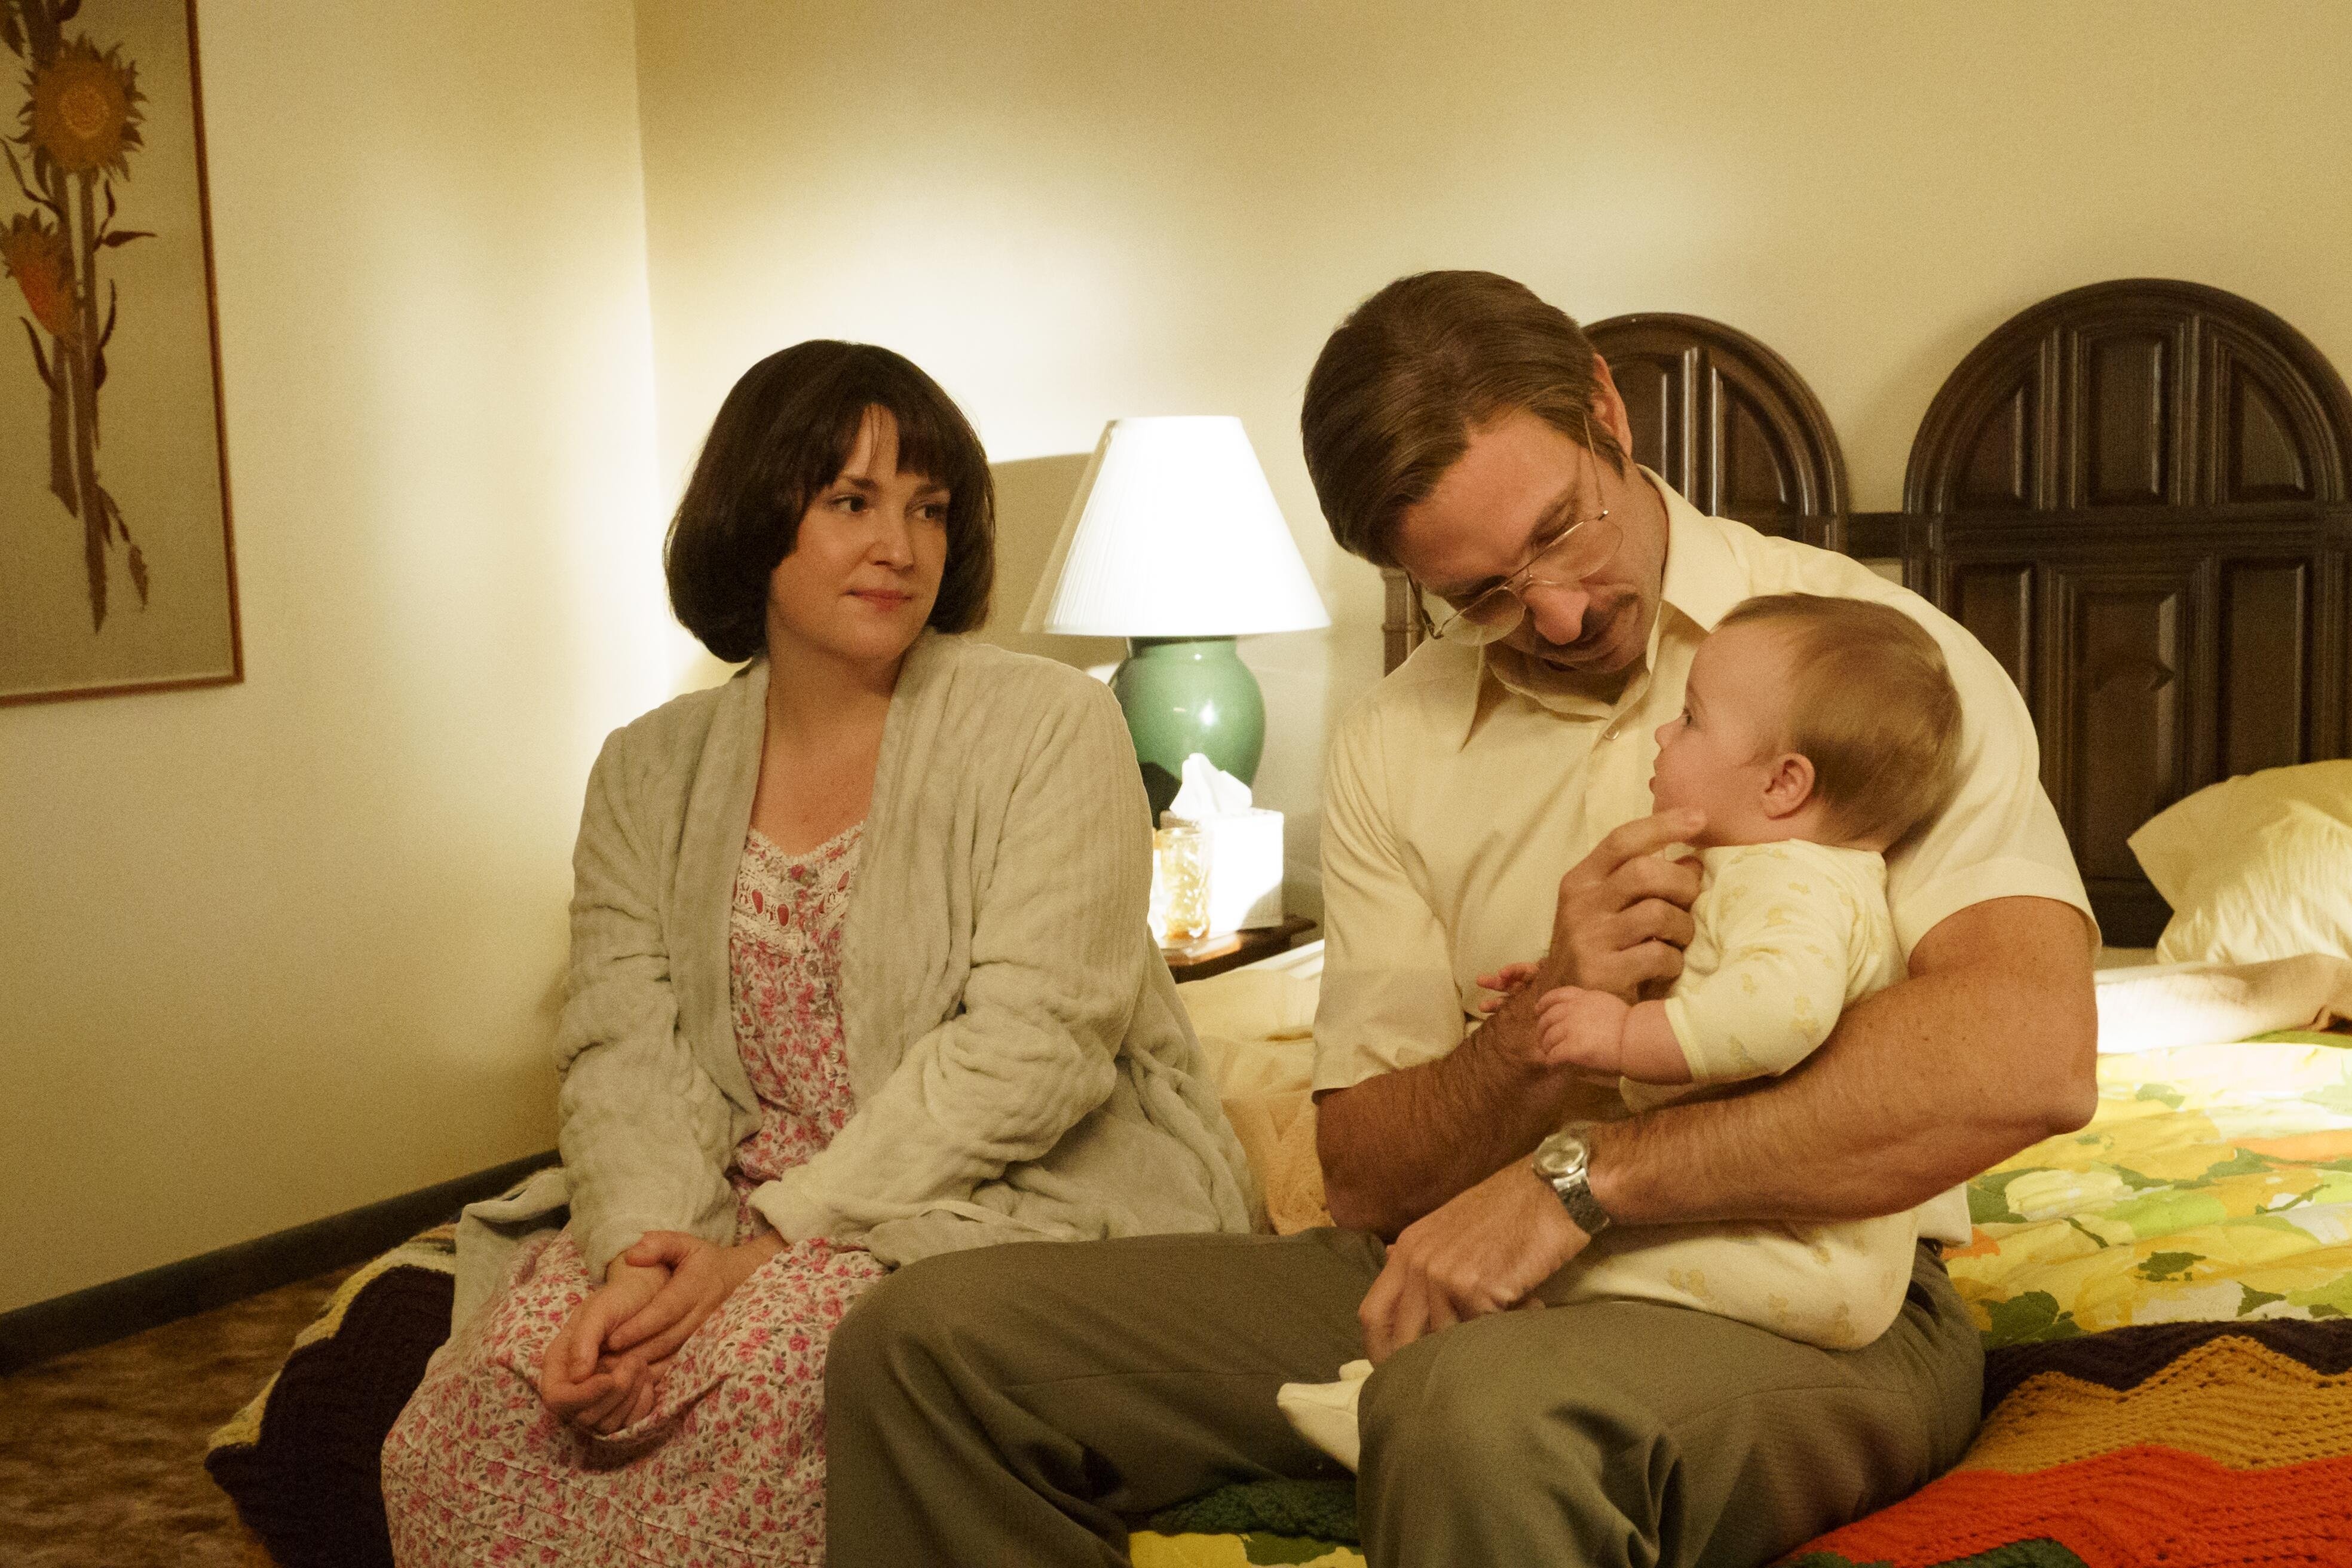 Melanie Lynskey as Betty Gore looks at Pablo Schreiber as Allan Gore while he holds their baby in 'Candy' on Hulu Episode 1